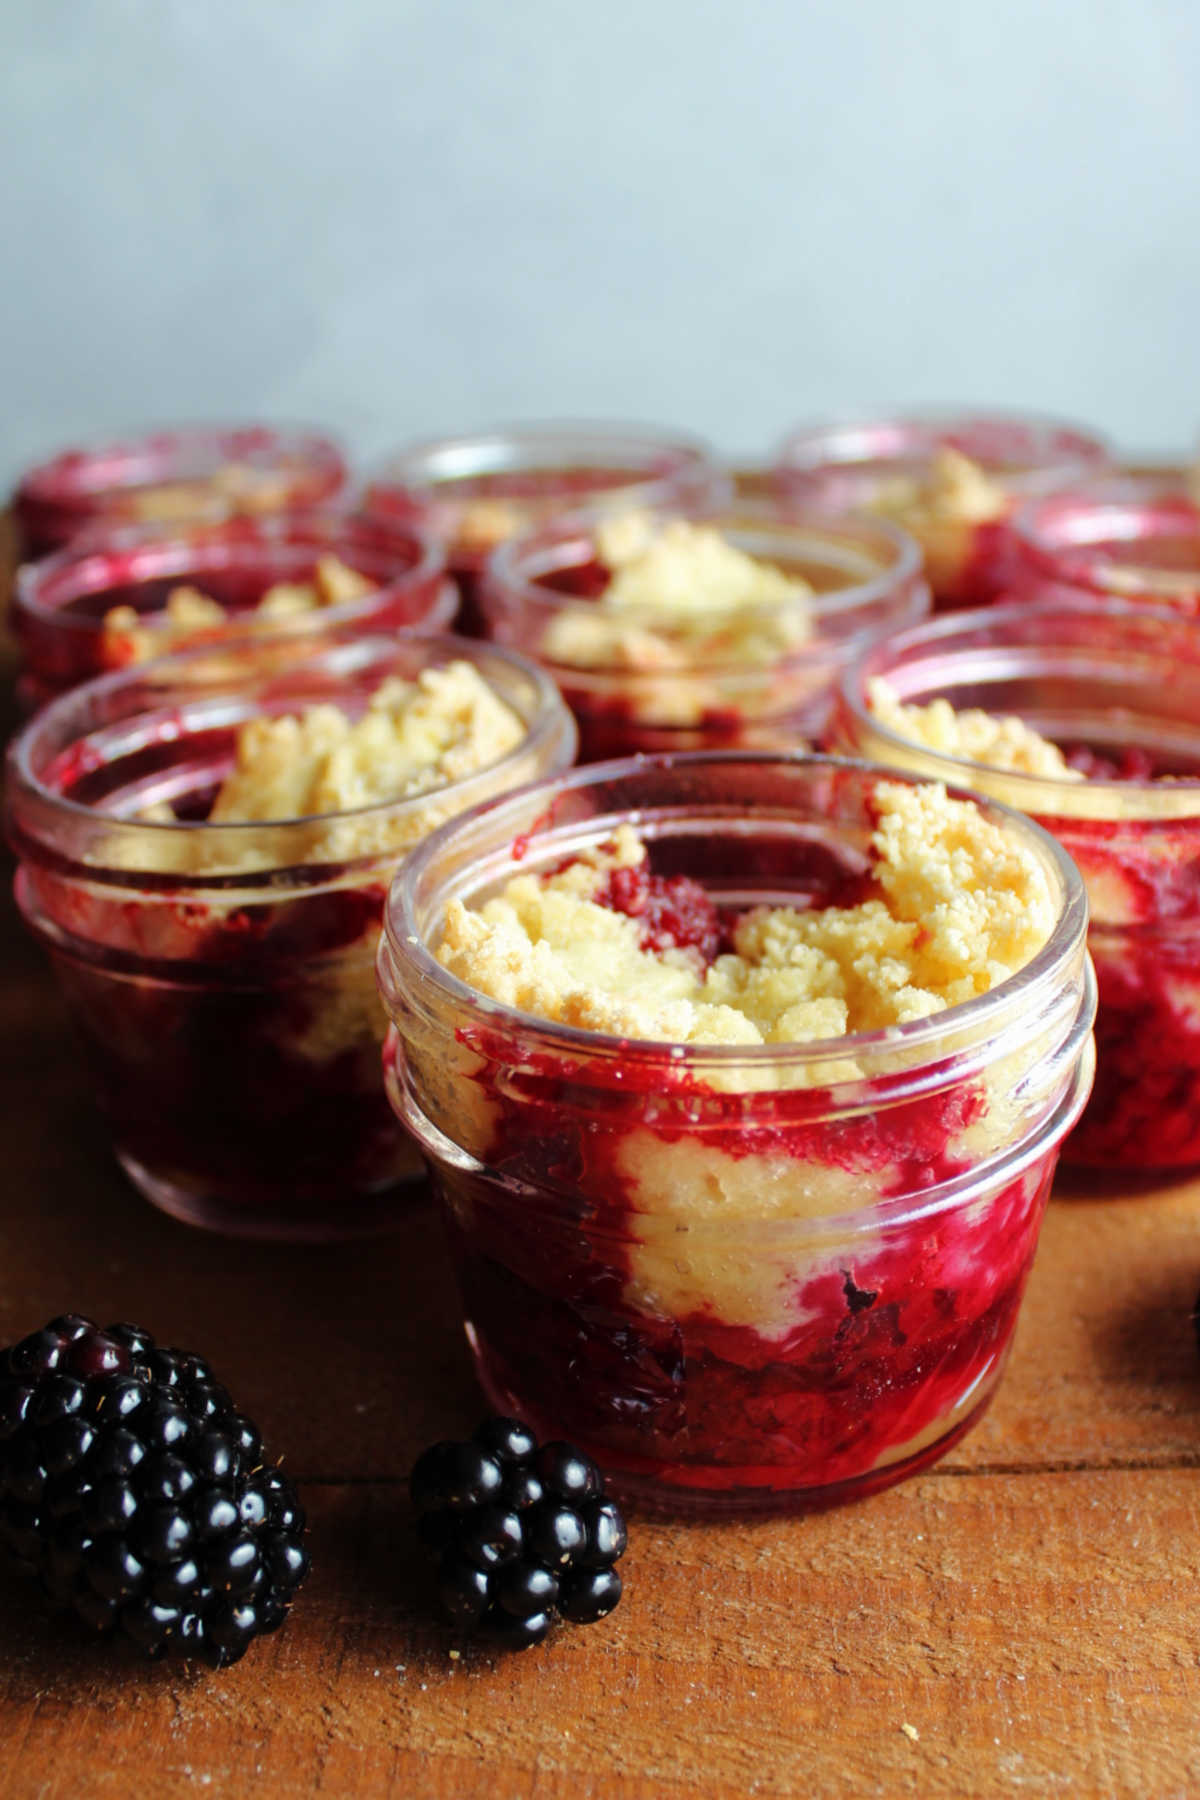 Looking at bright purple blackberry filling under golden cobbler topping in small glass jars.